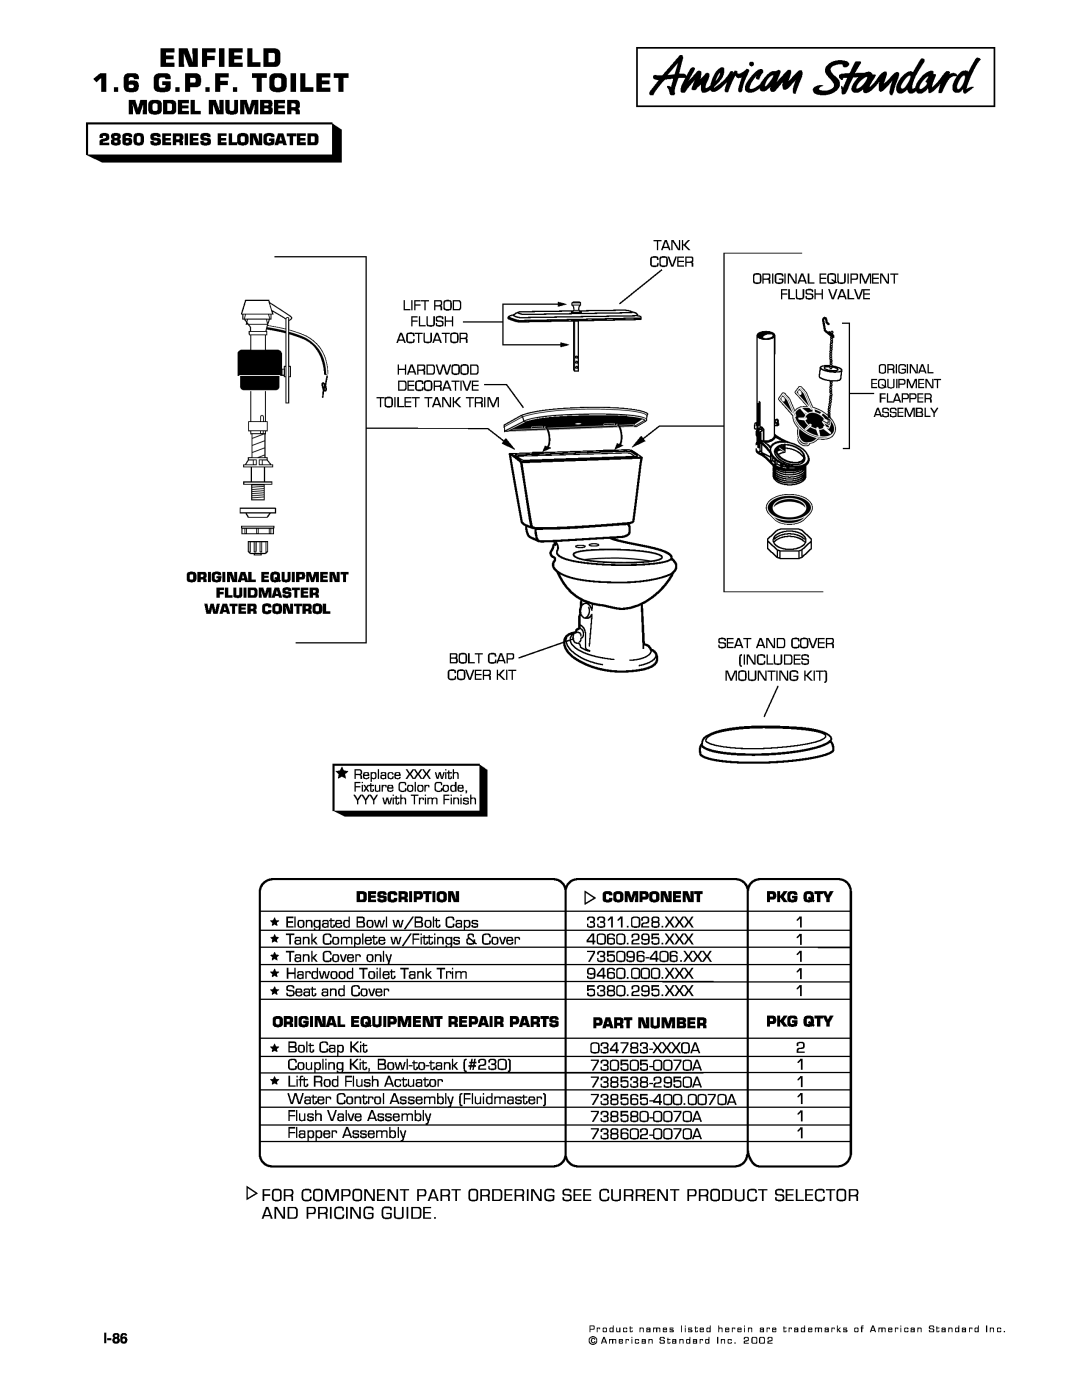 American Standard 2860 Series manual ENFIELD 1.6 G.P.F. TOILET, Model Number, Series Elongated, Description, Component 